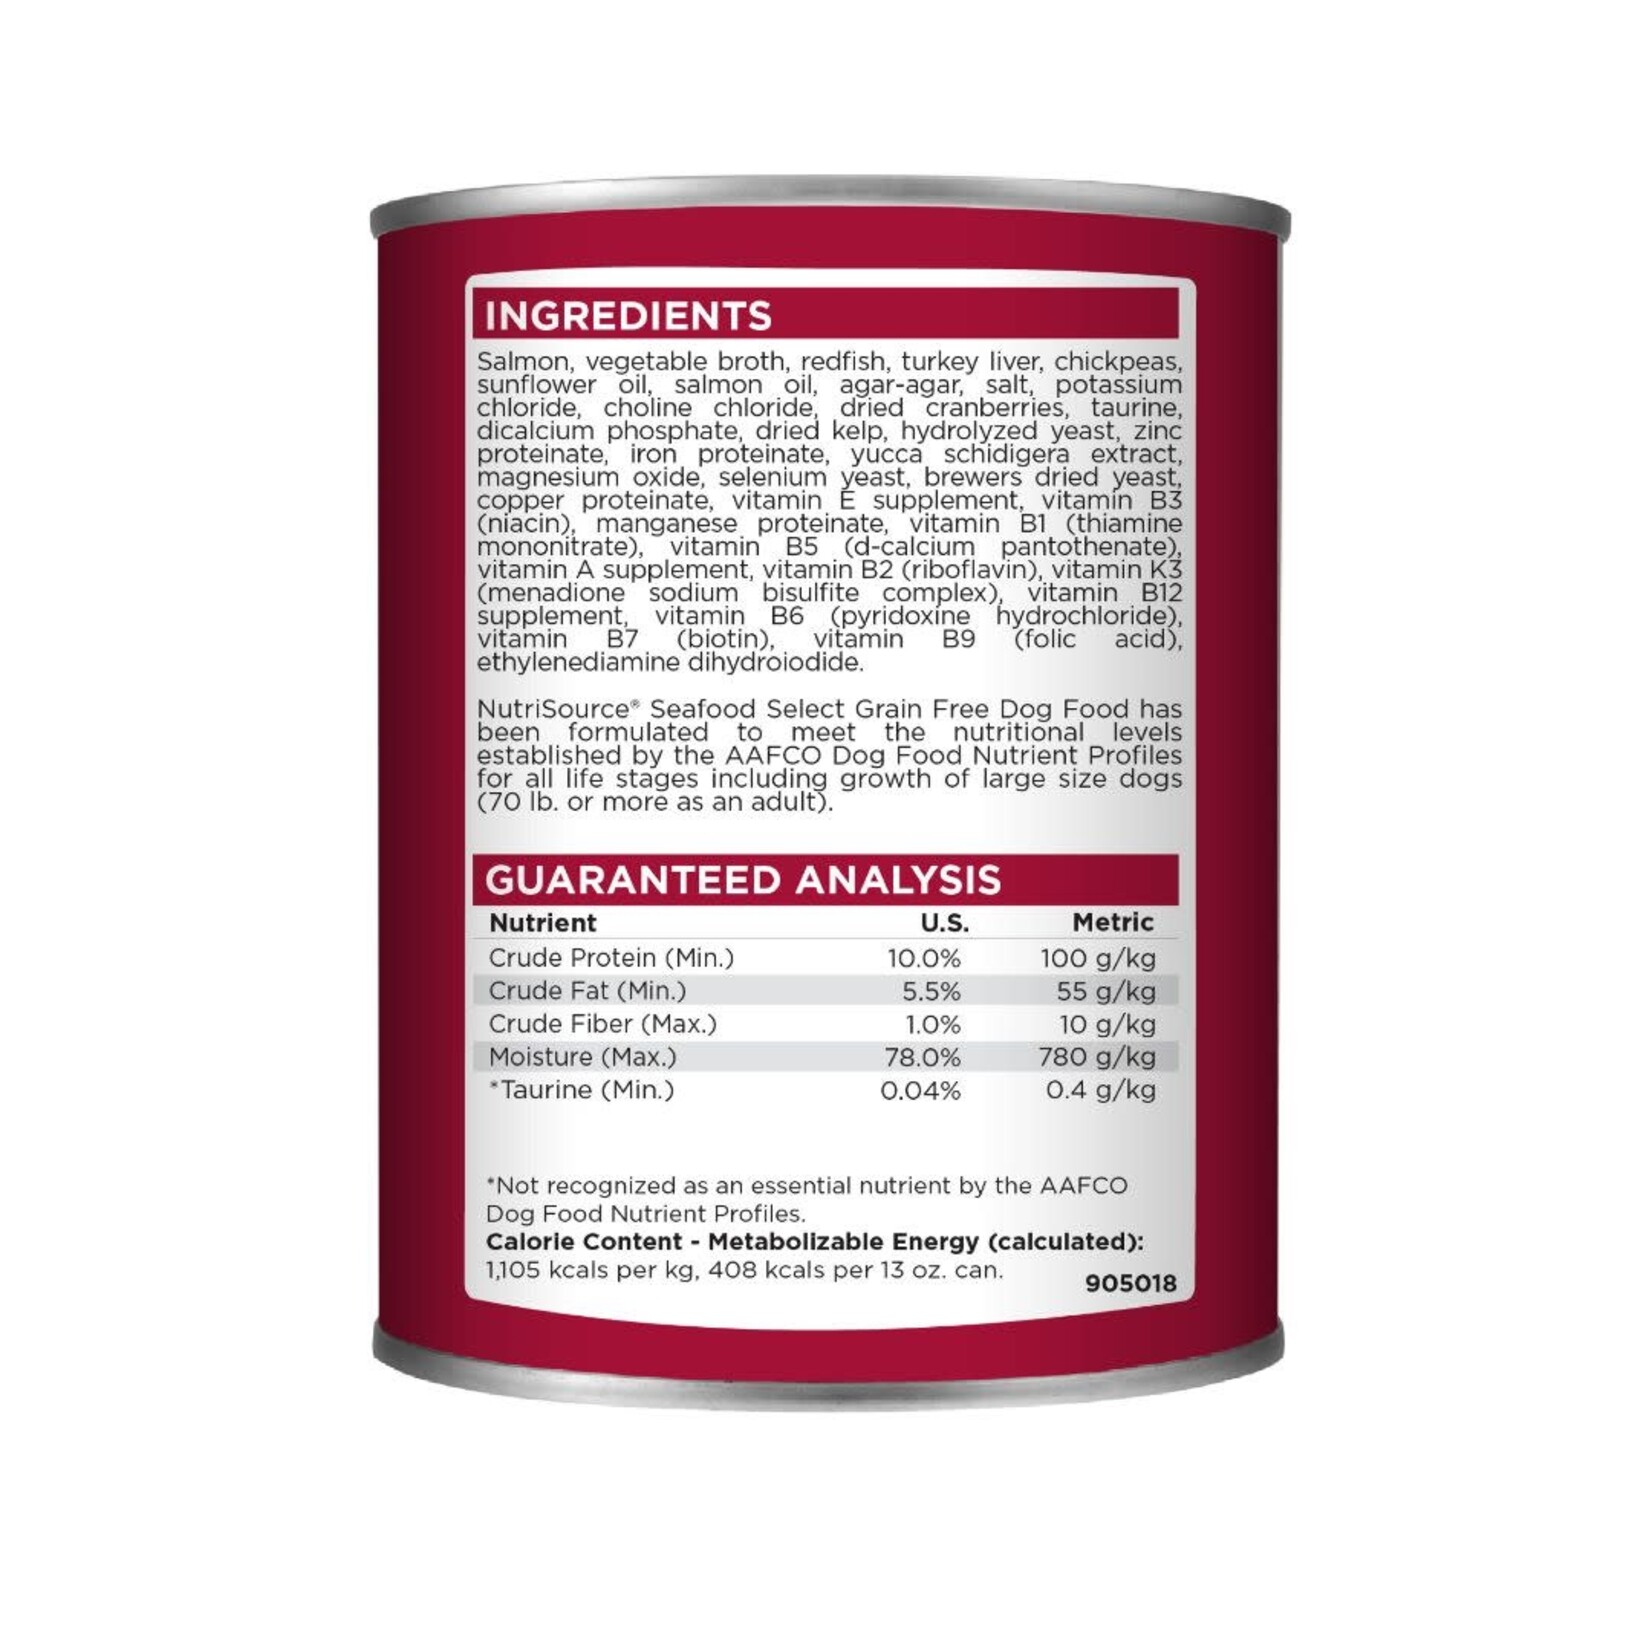 NutriSource NutriSource Seafood Select Recipe Canned Dog Food